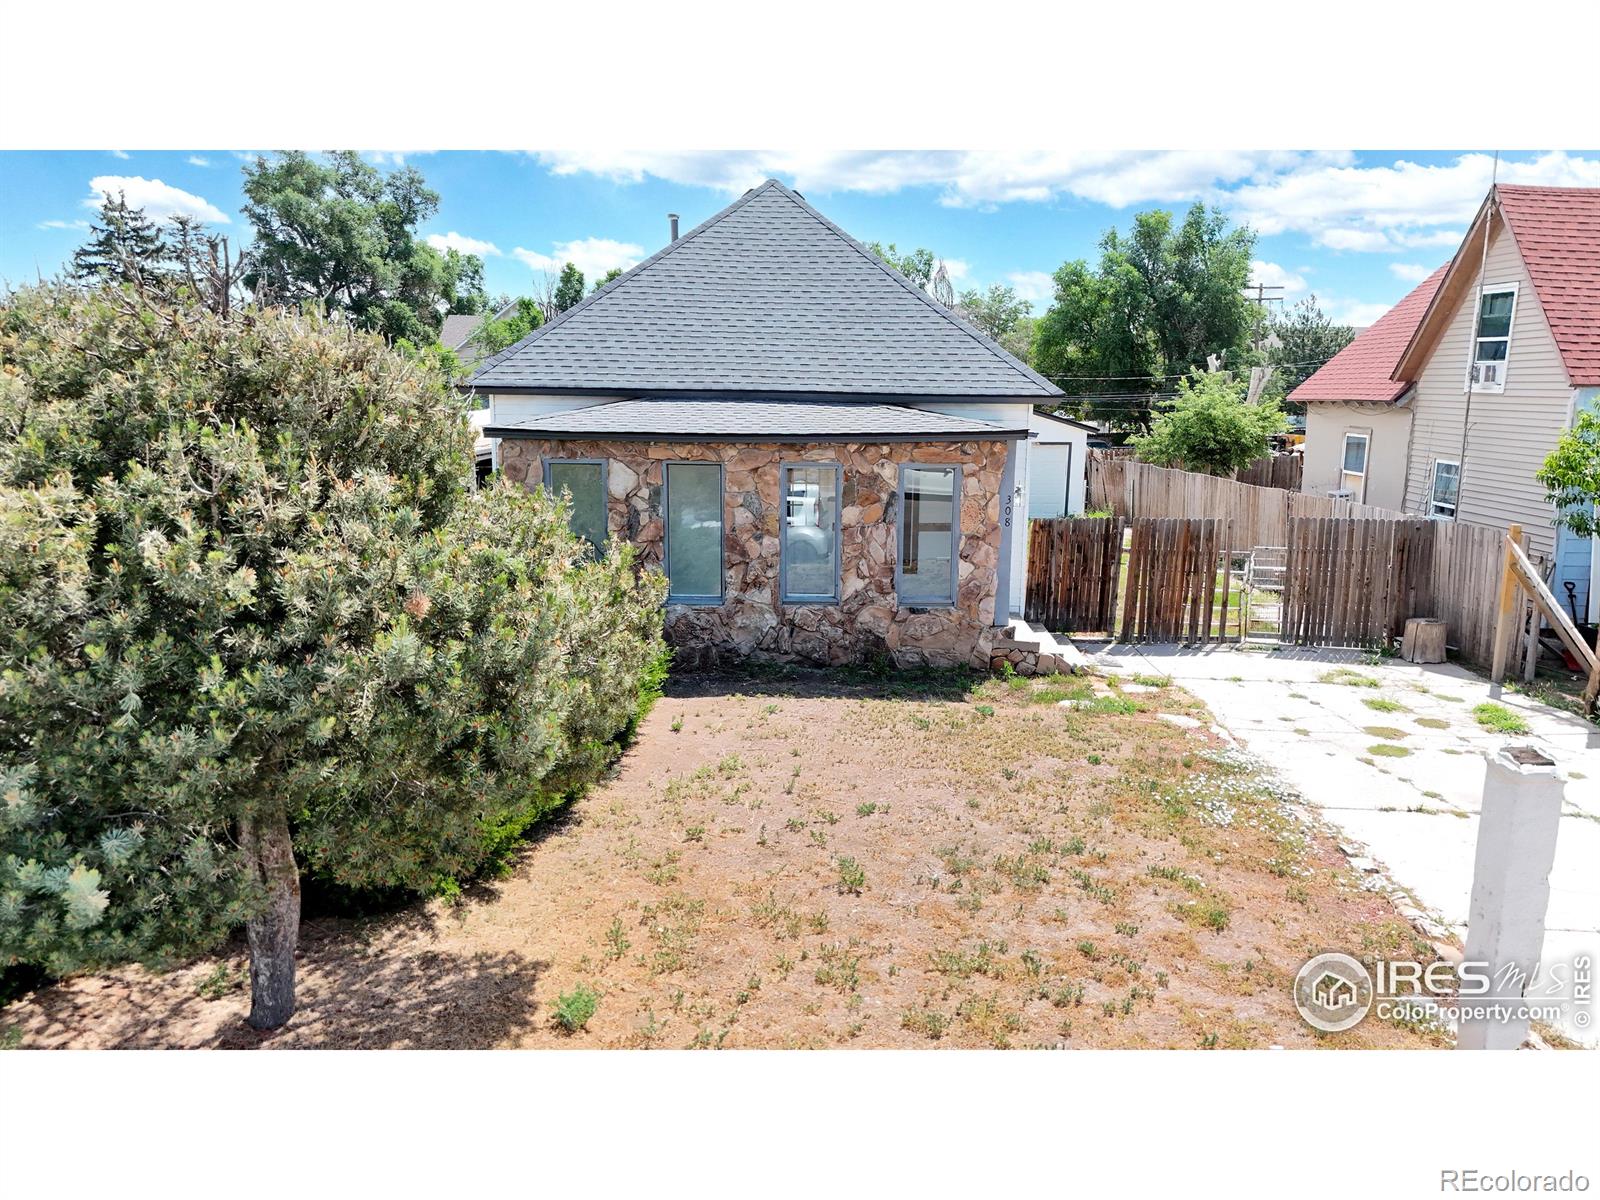 308  12th Avenue, greeley MLS: 4567891014559 Beds: 3 Baths: 1 Price: $310,000